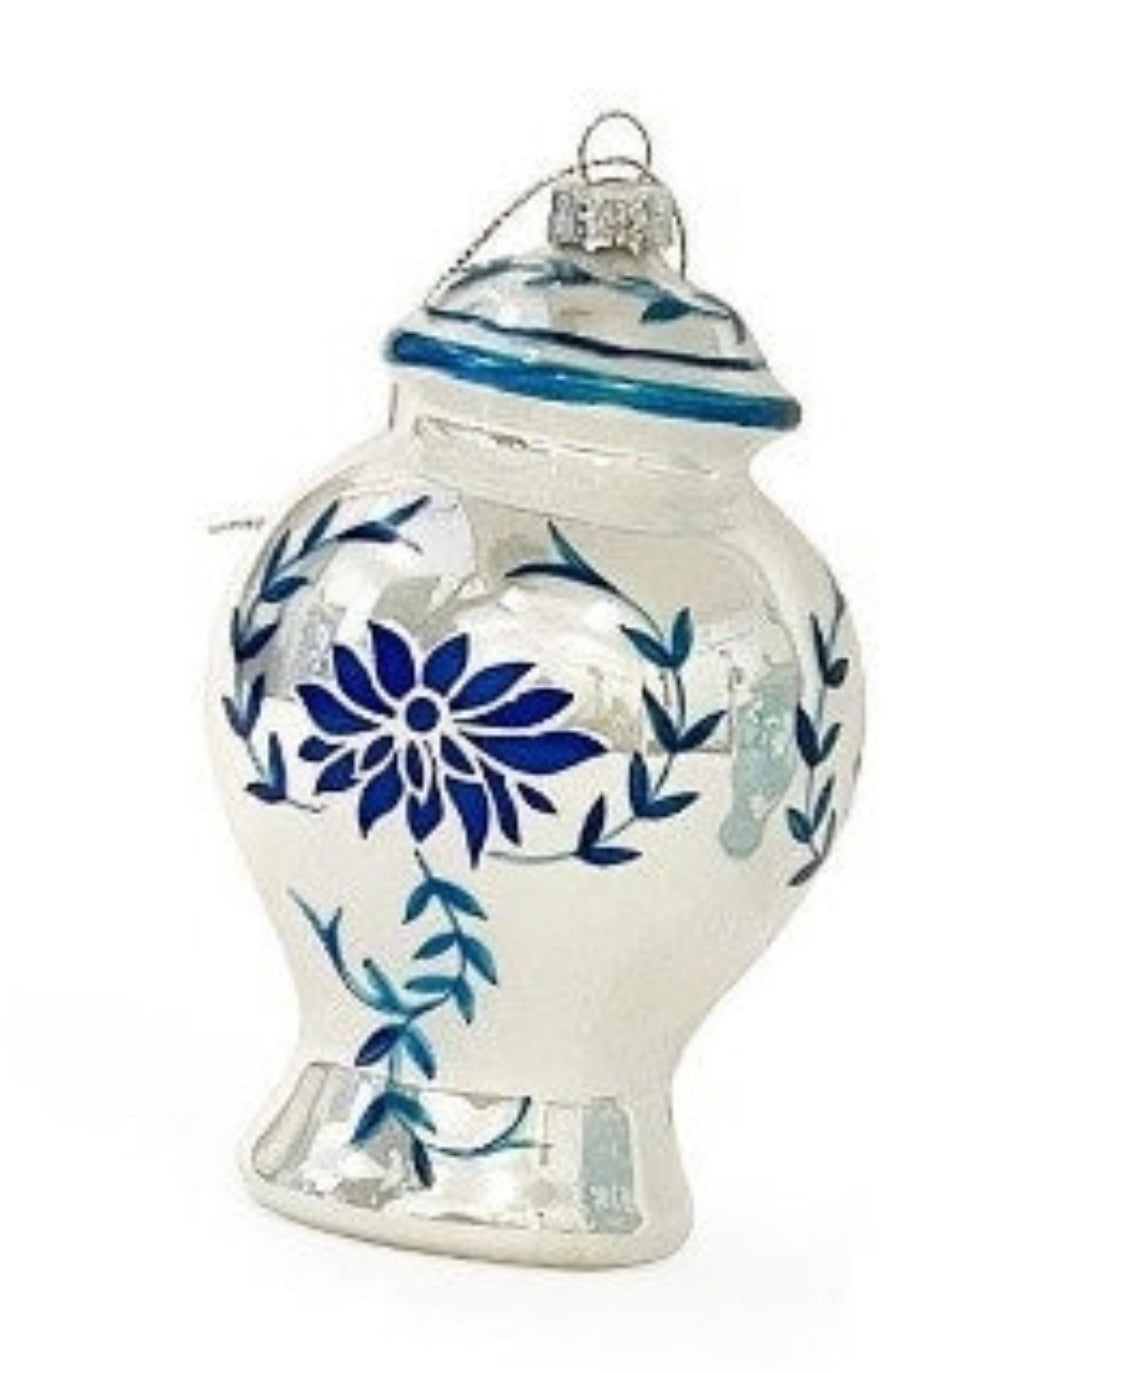 Blue and White Hand-Crafted Ornaments